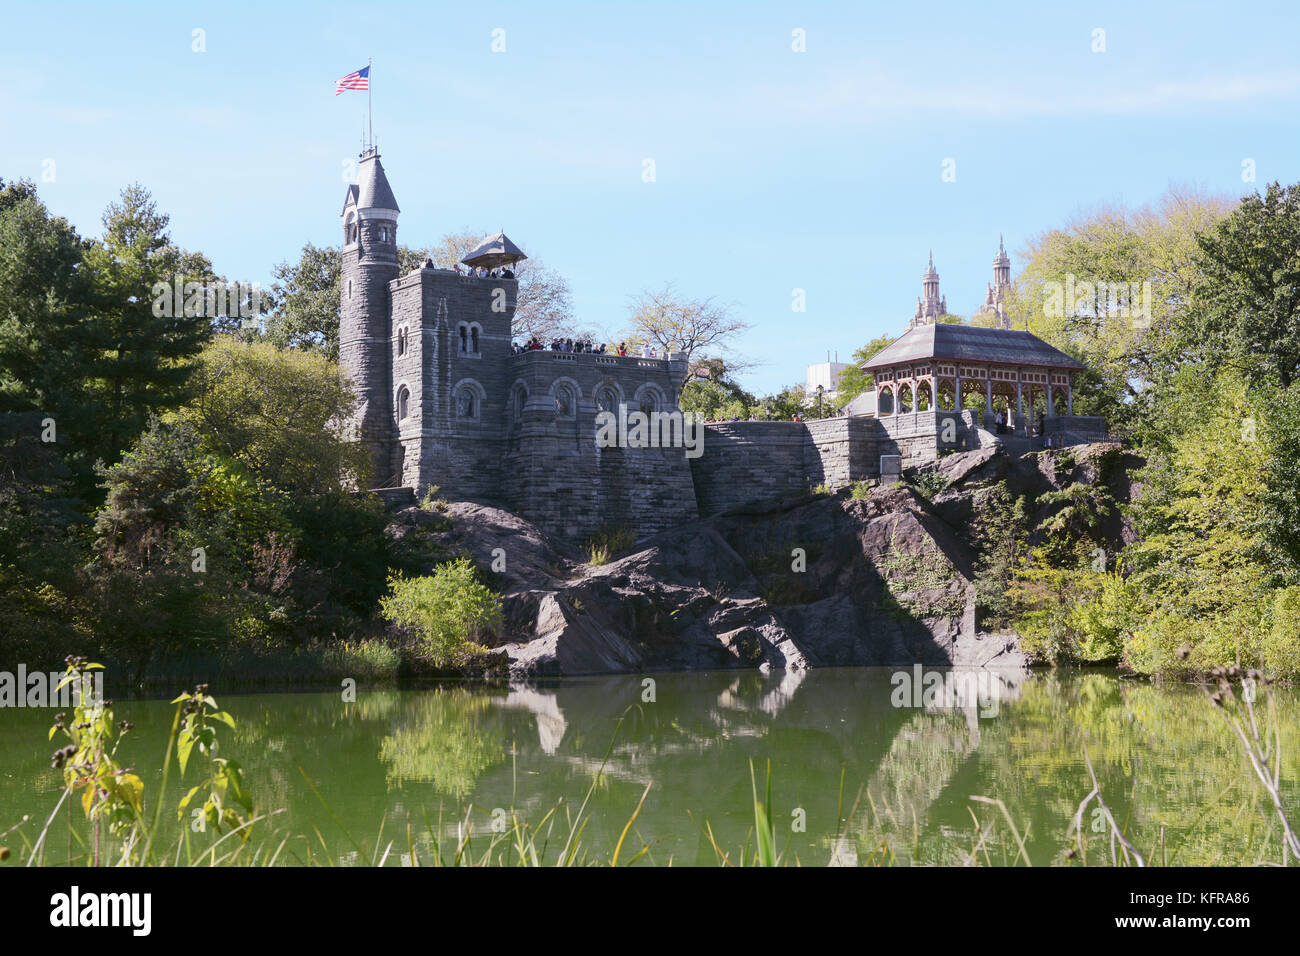 NEW YORK - OCTOBER 20, 2017: Belvedere Castle in Central Park, overlooking Turtle Pond. The American flag flies from the tower. Tourists take in the v Stock Photo